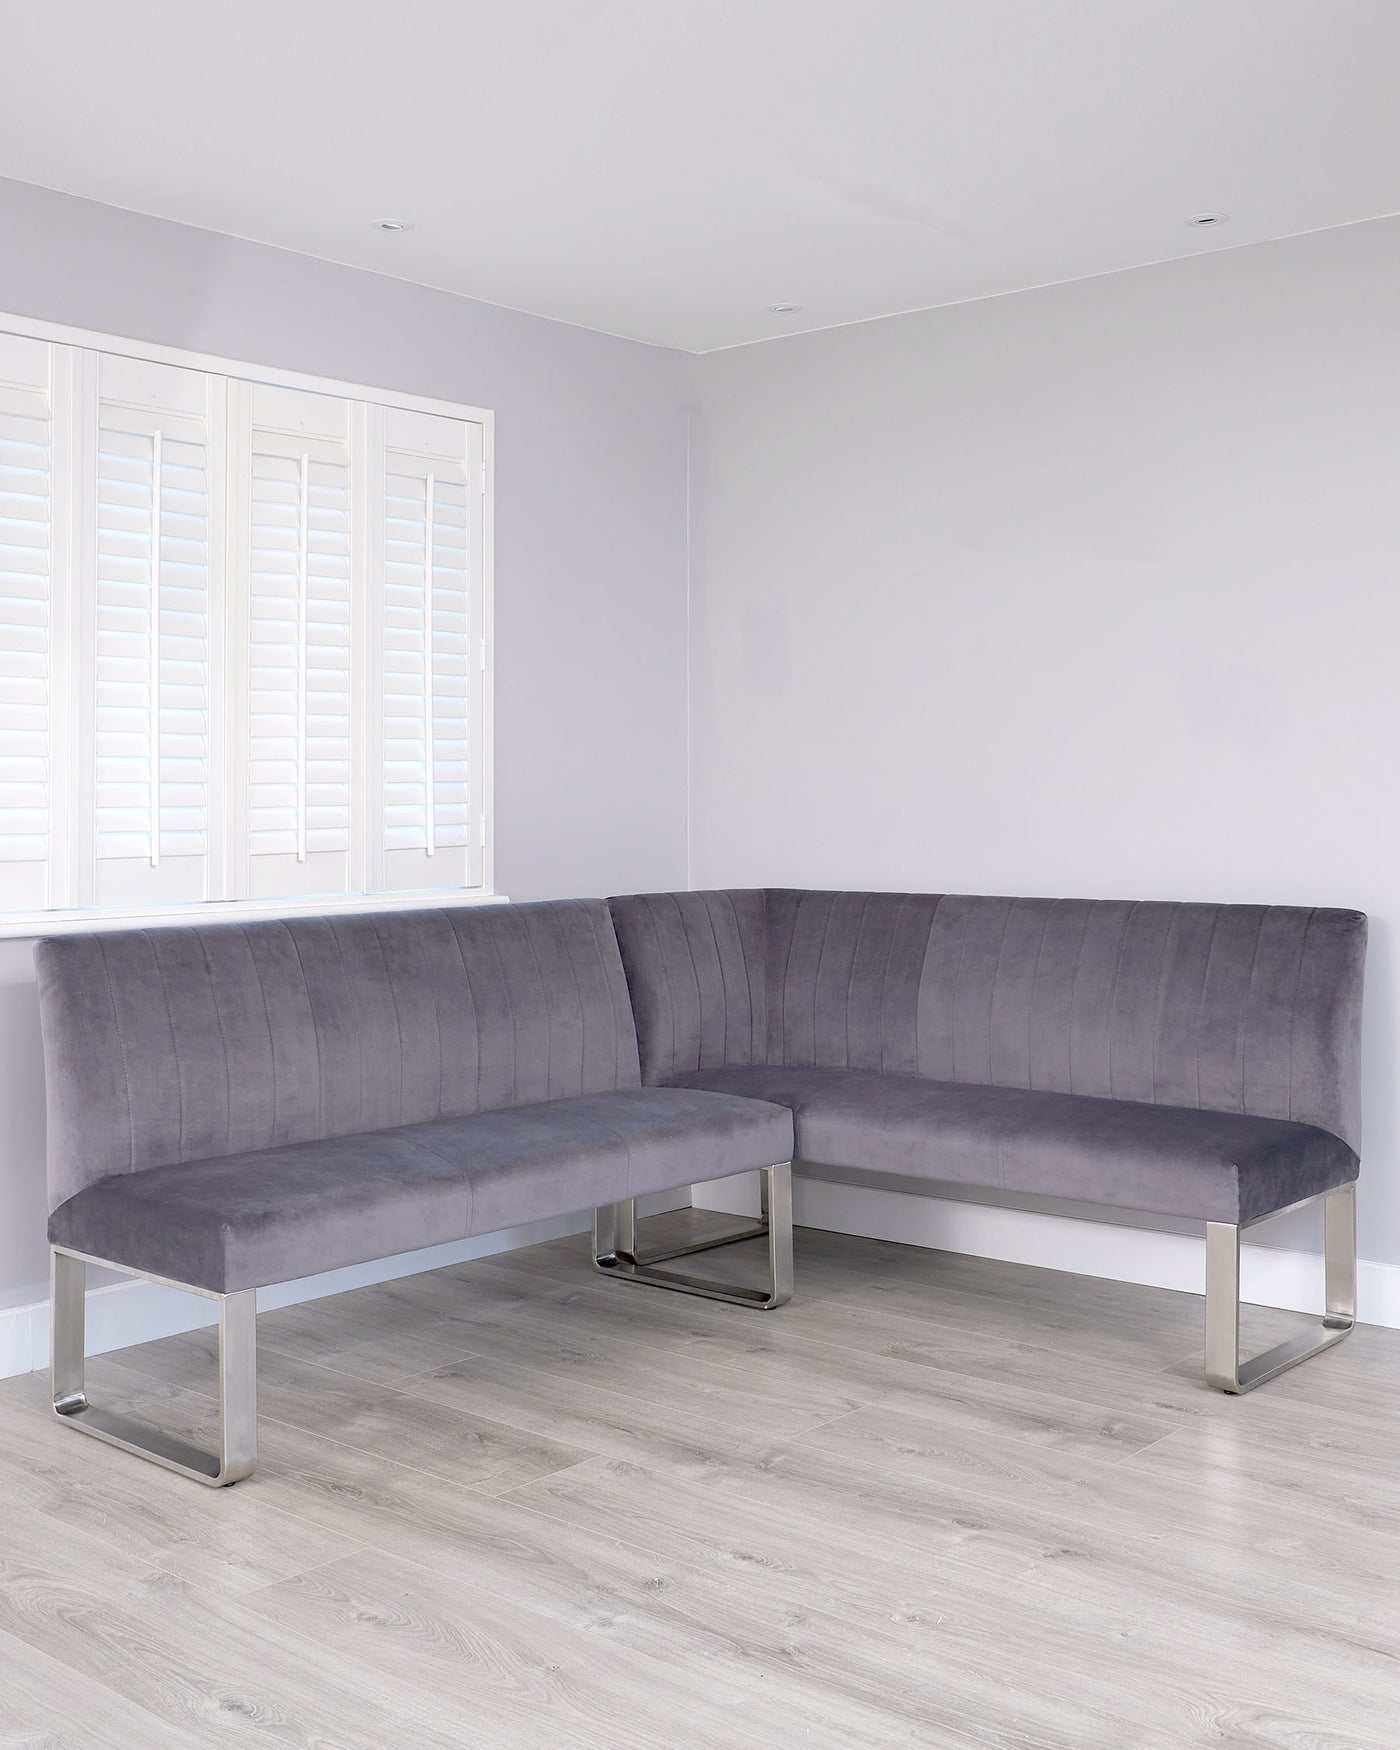 Modern L-shaped grey fabric corner sofa with clean lines and metal legs, set in a minimalist room with white plantation shutters and light wood flooring.